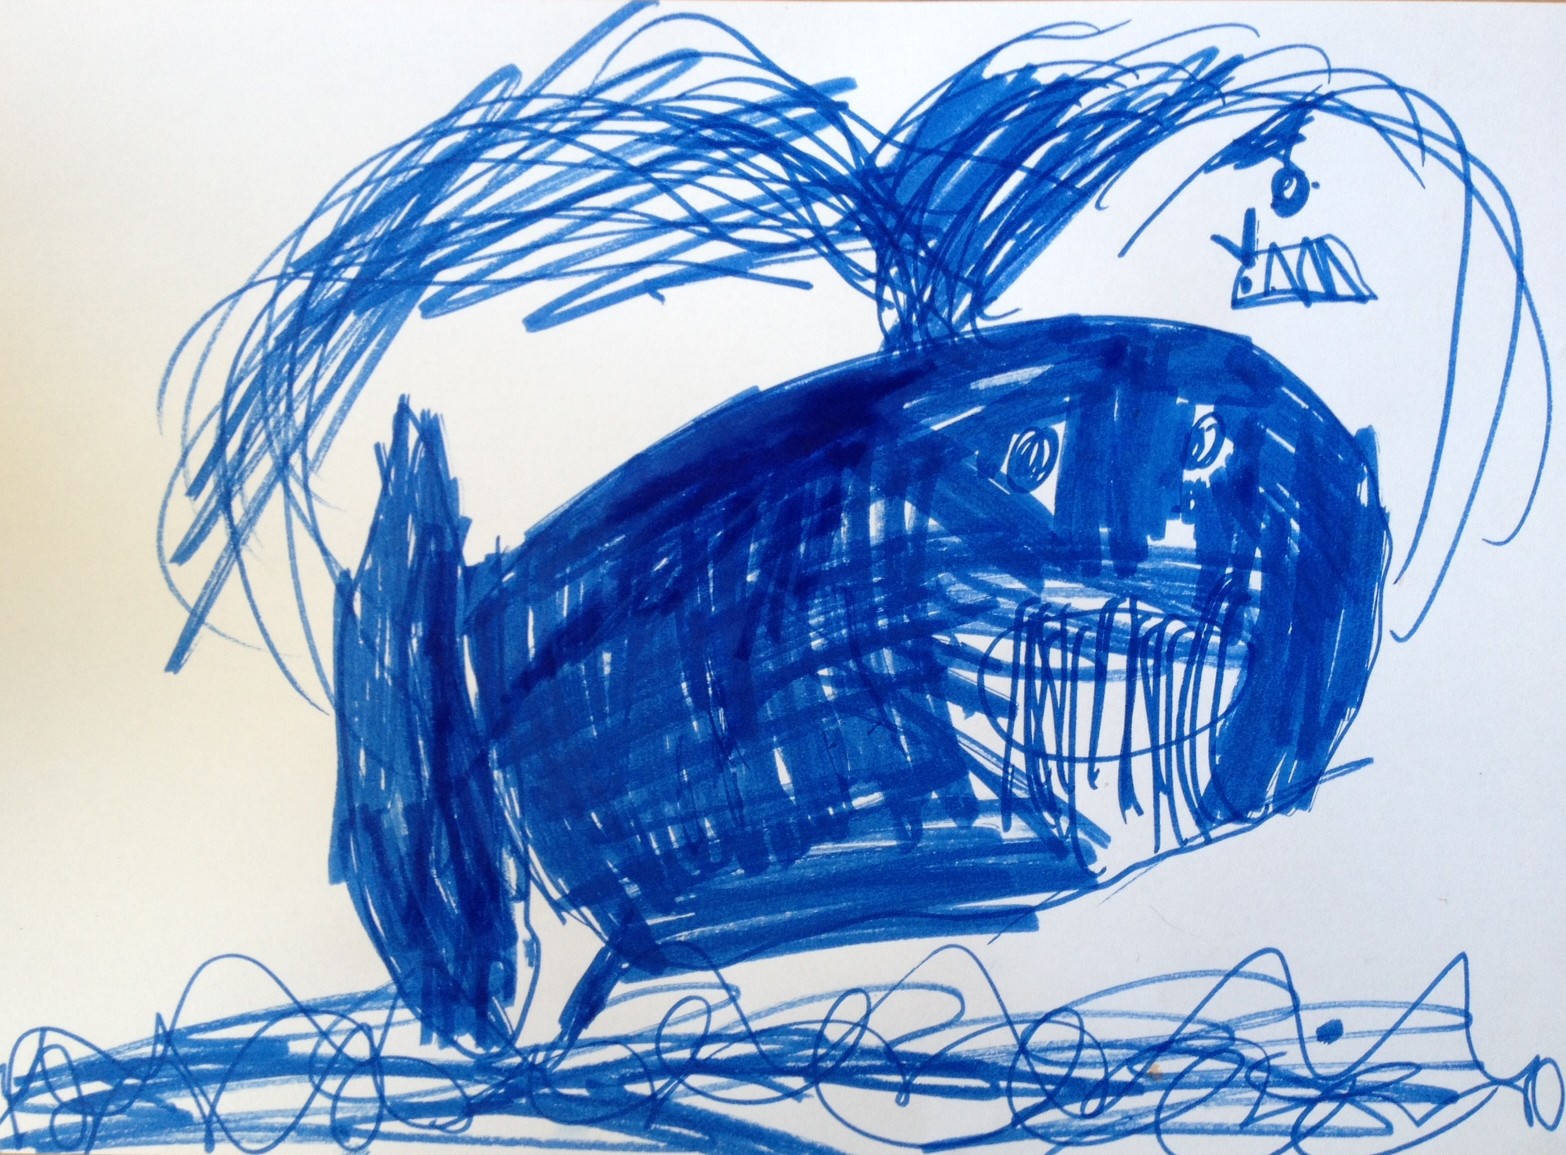 'A humpback whale spraying out water' by Frances Williams, Age 6.